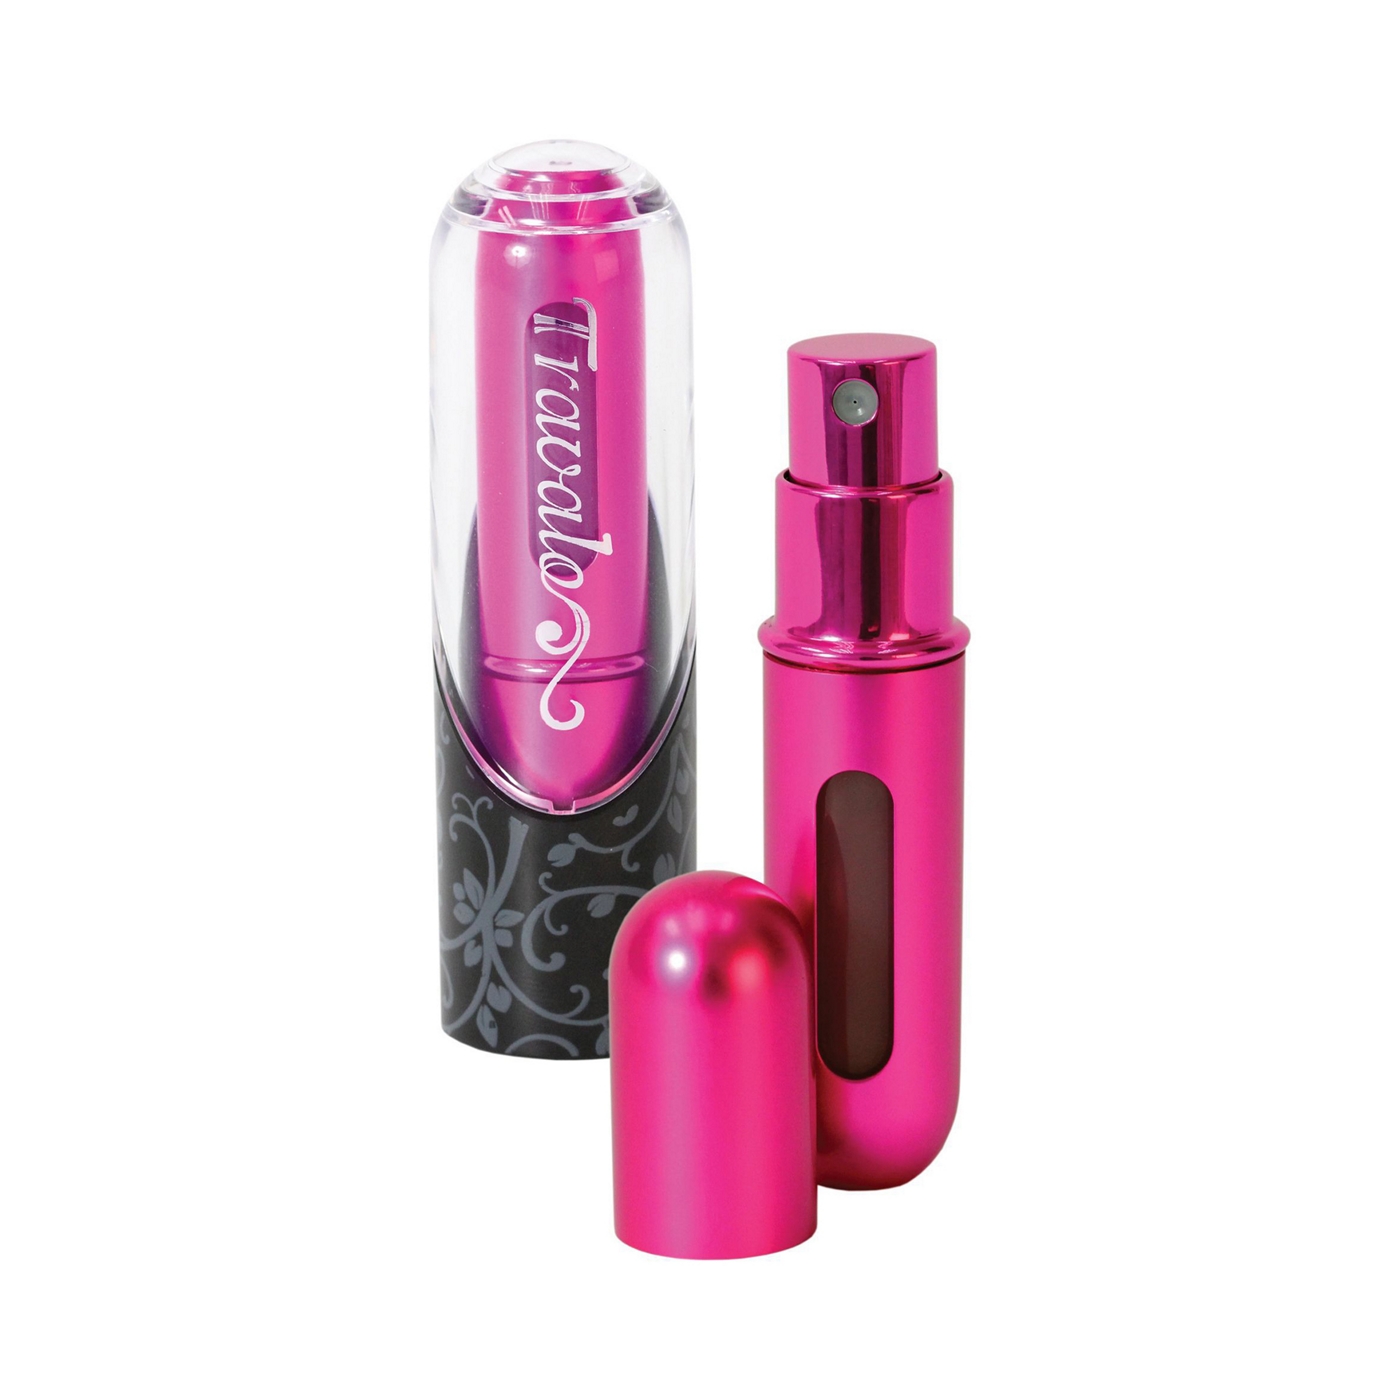 Travalo Classic Excel Refill Perfume Spray in Hot Pink